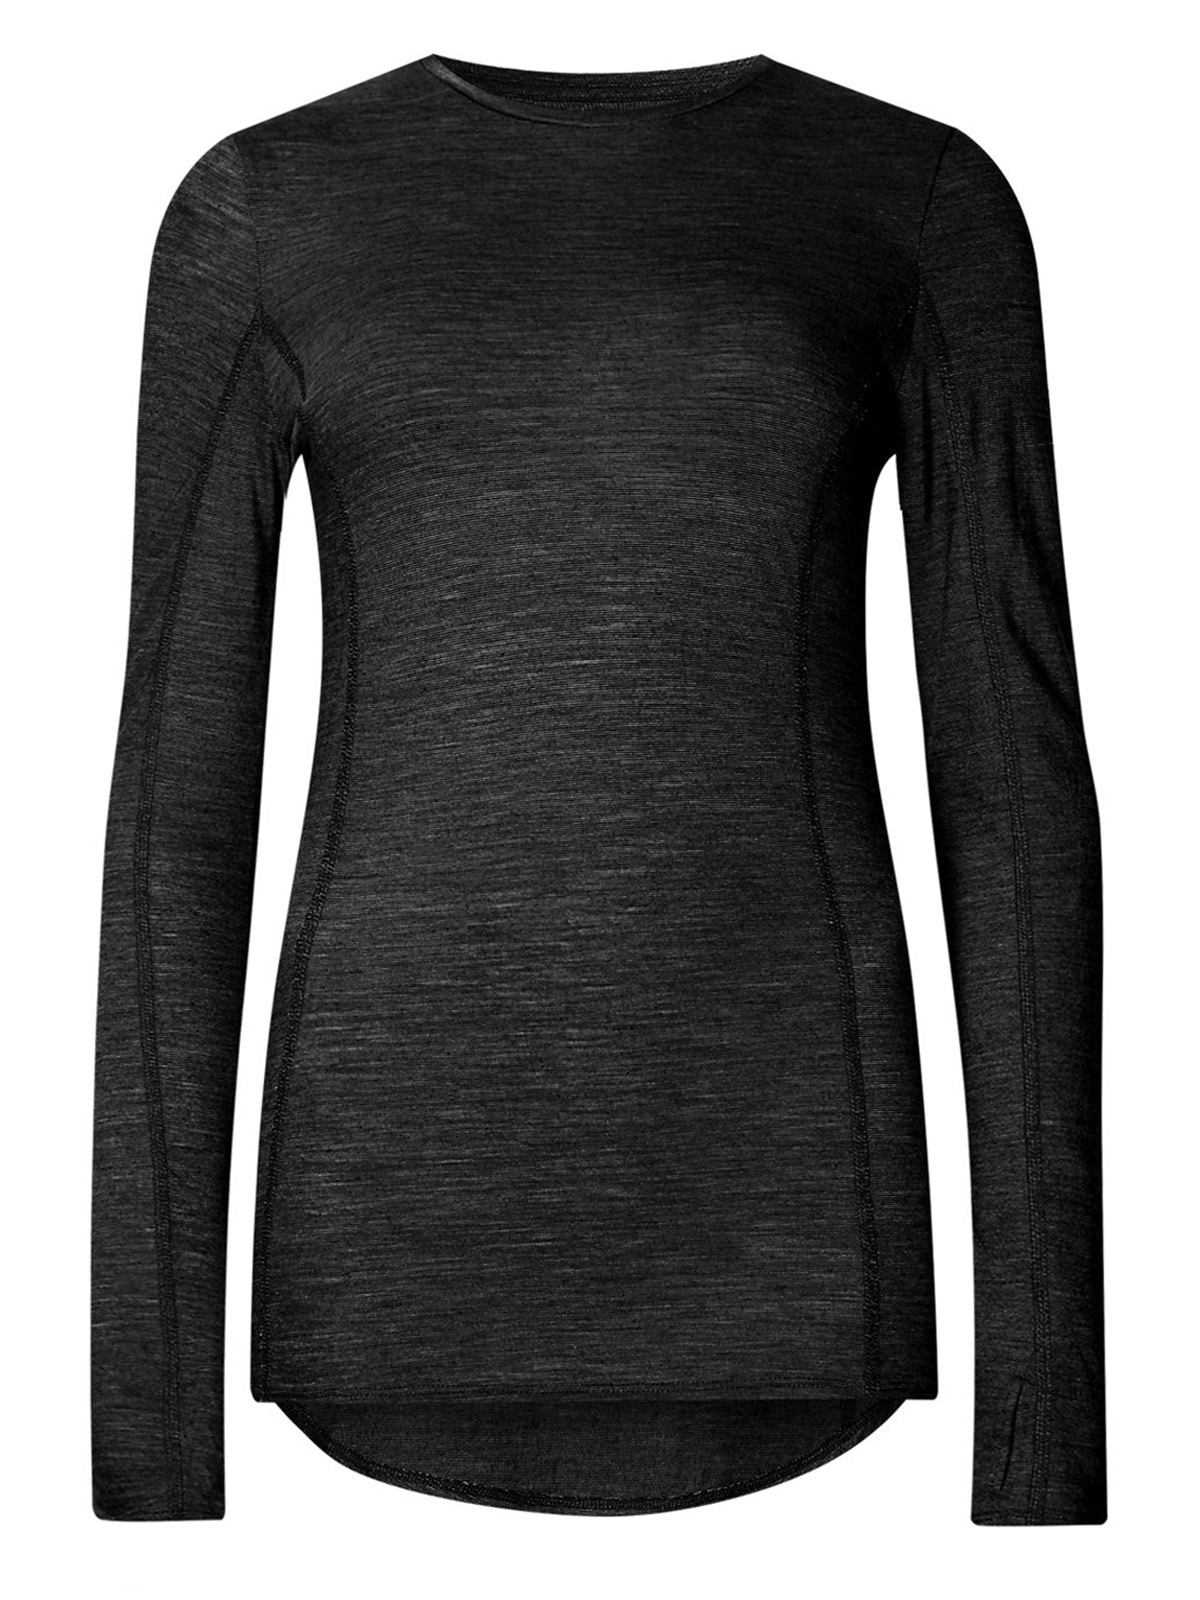 Marks and Spencer - - M&5 BLACK Thermal Long Sleeve Top - Size 6